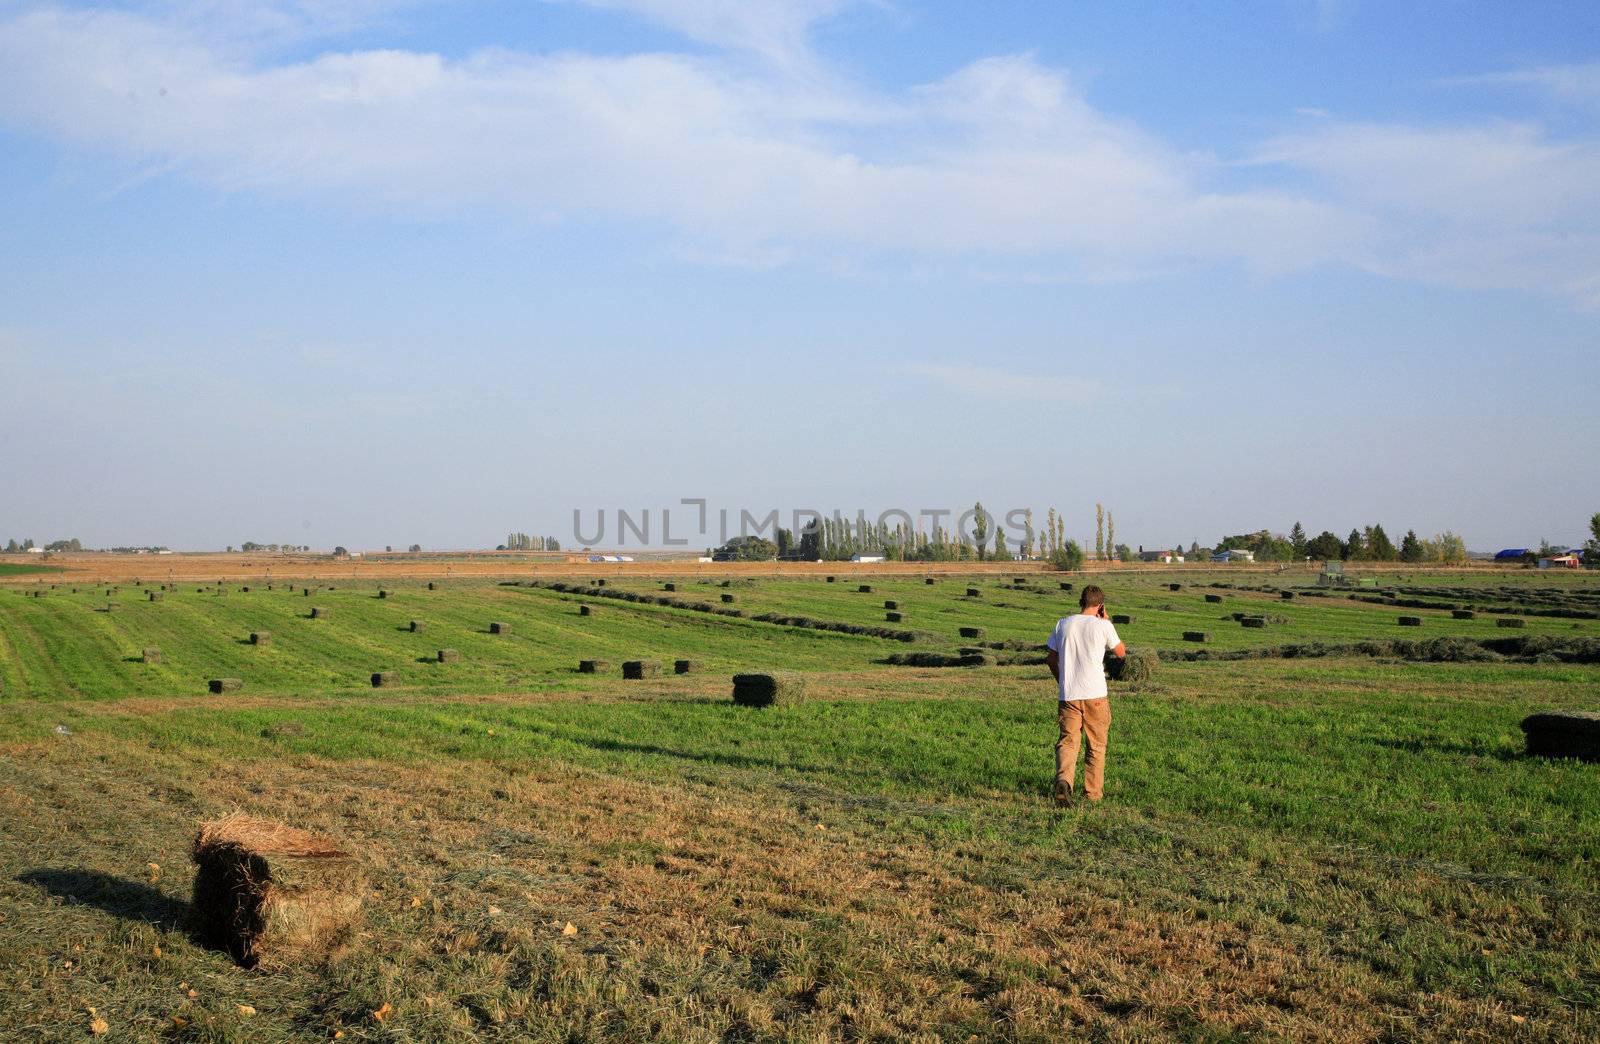 A young farmer on a field with hay bales